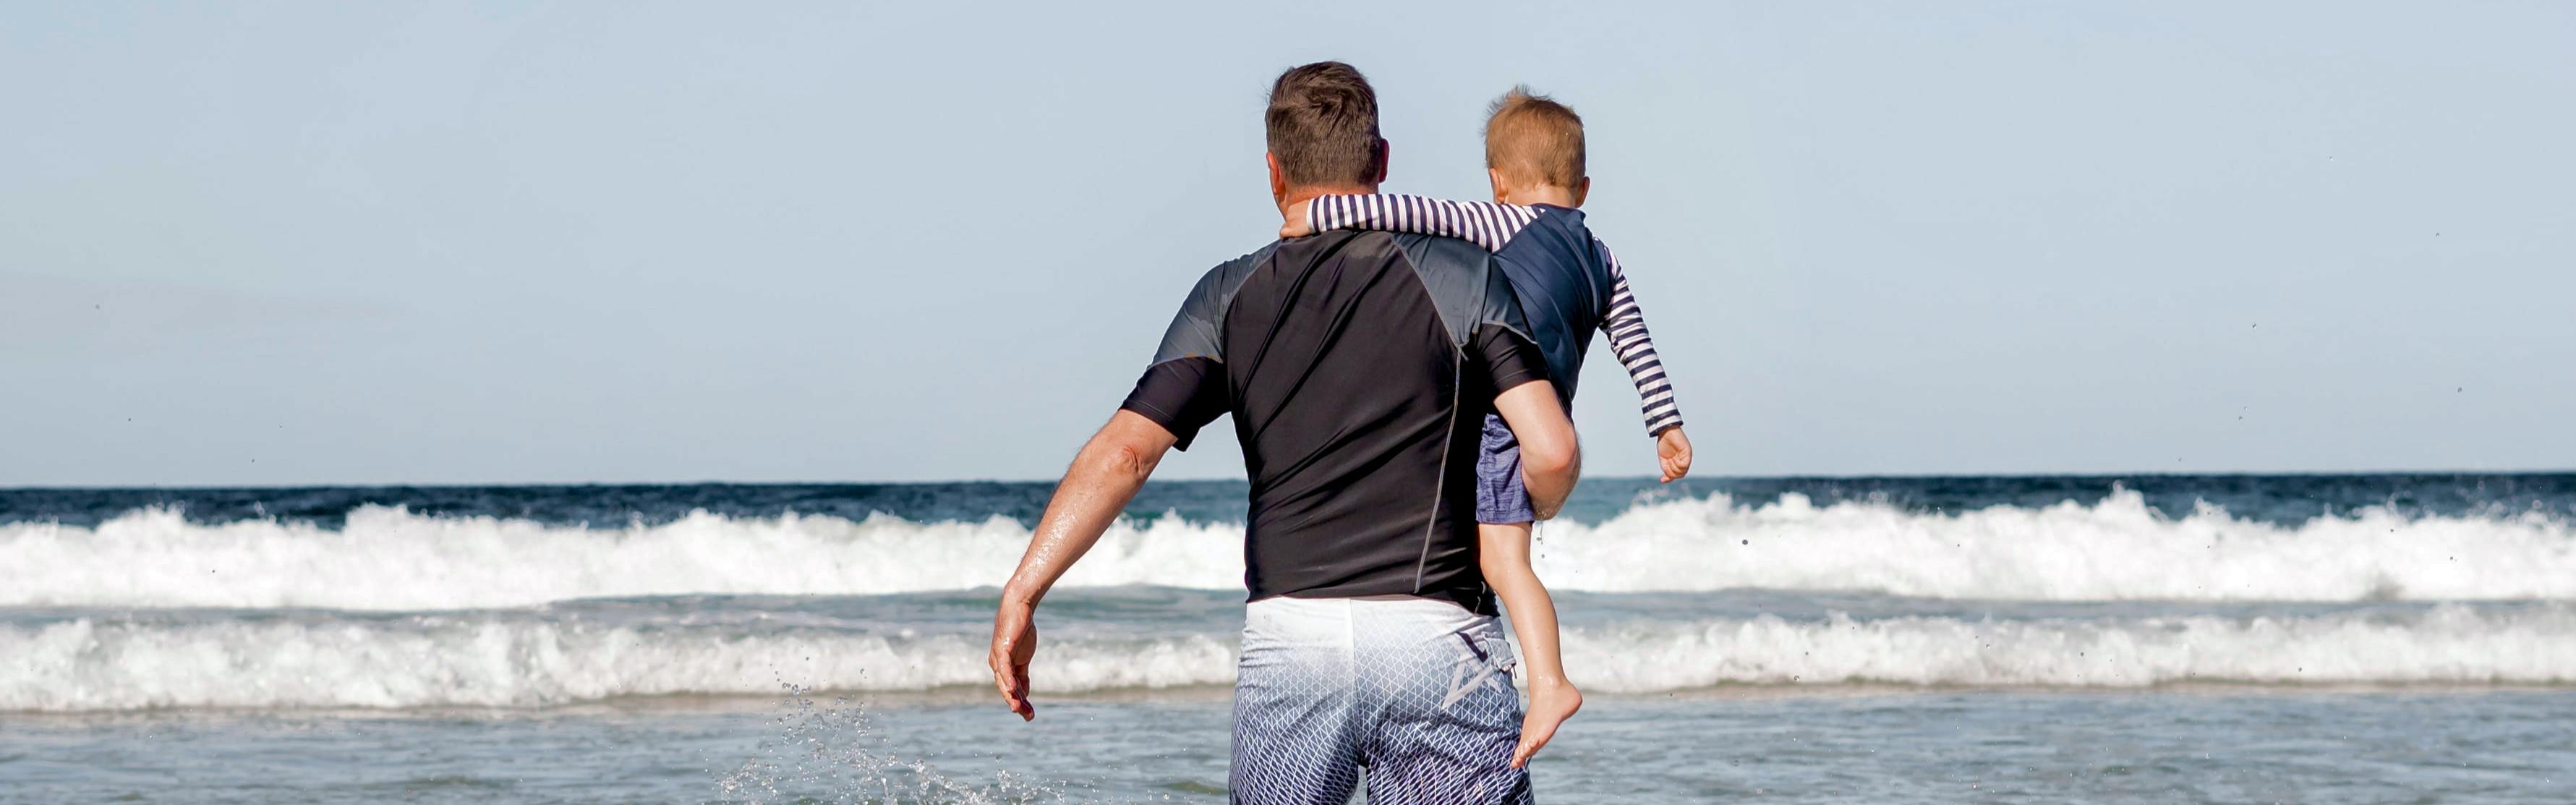 A man holds a young boy on his hip and walks toward the ocean. They both wear board shorts and sun shirts.